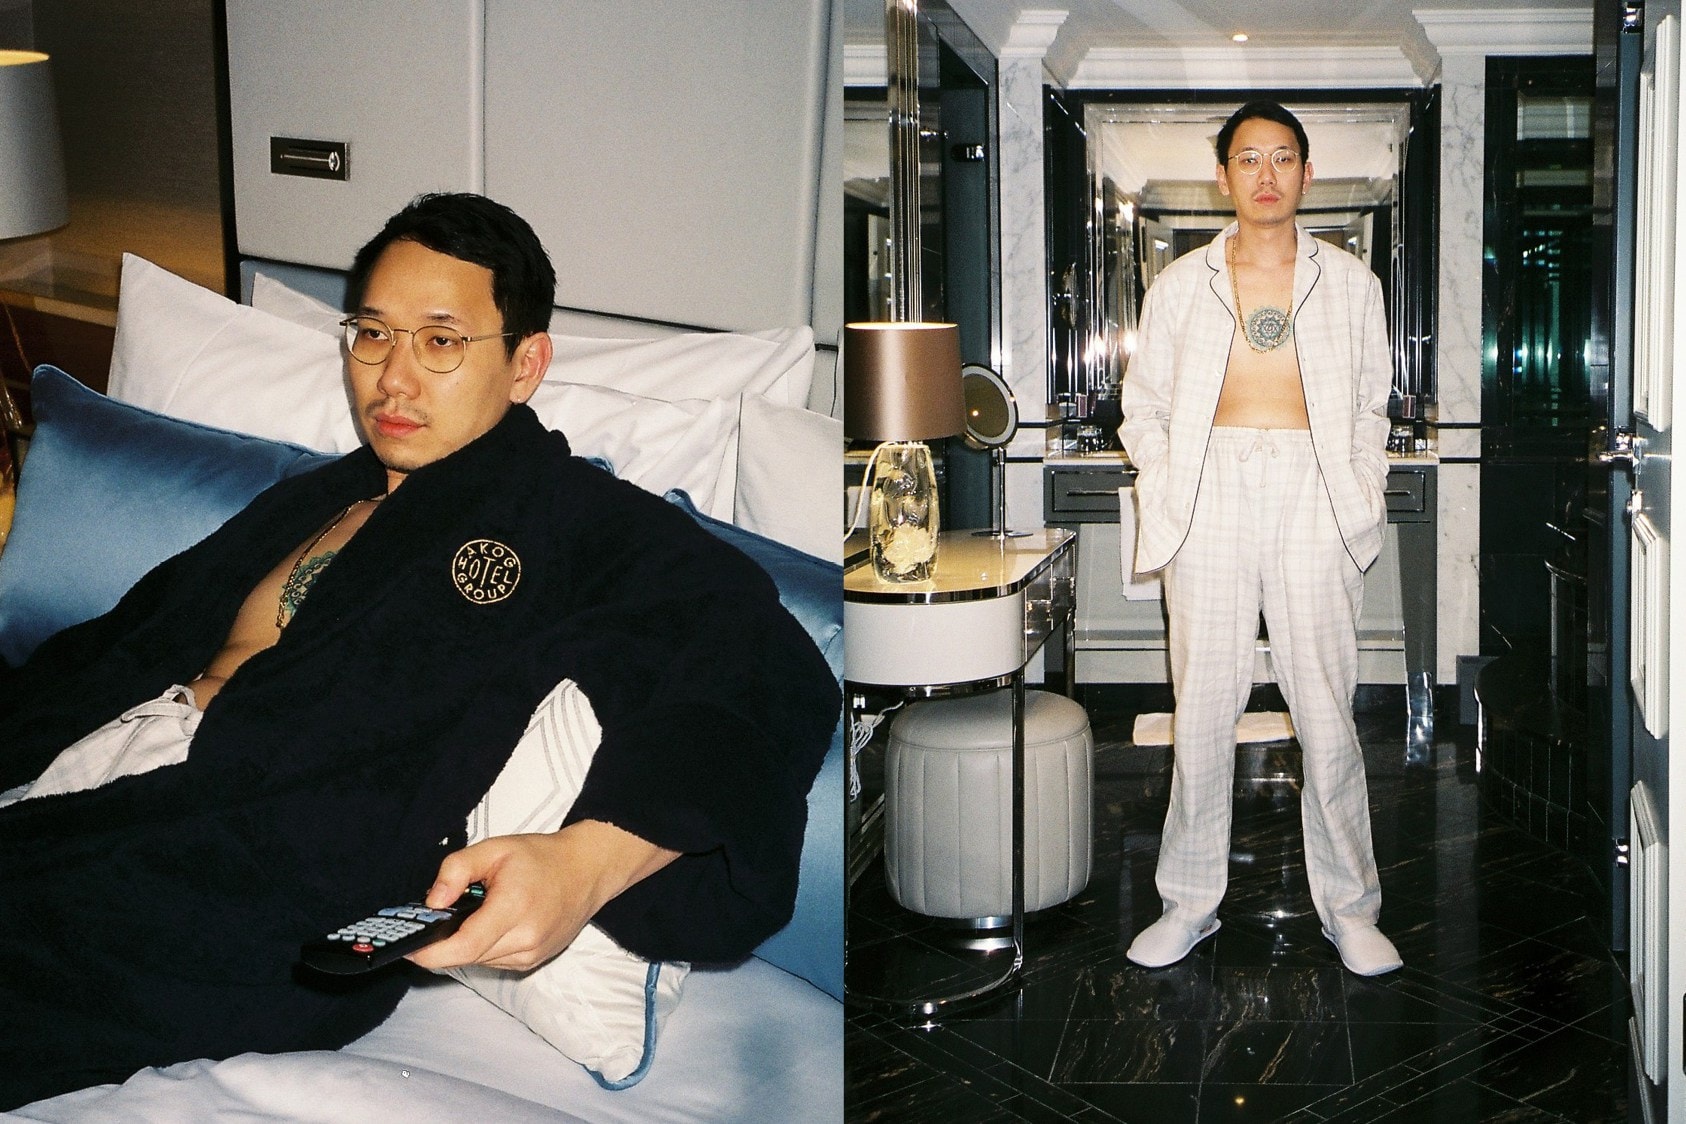 A Kind of Guise Winter 2017 2018 Limited Edition Capsule Collection Hotel Bathrobe embroidered pajama set comfortable relaxed Munich germany